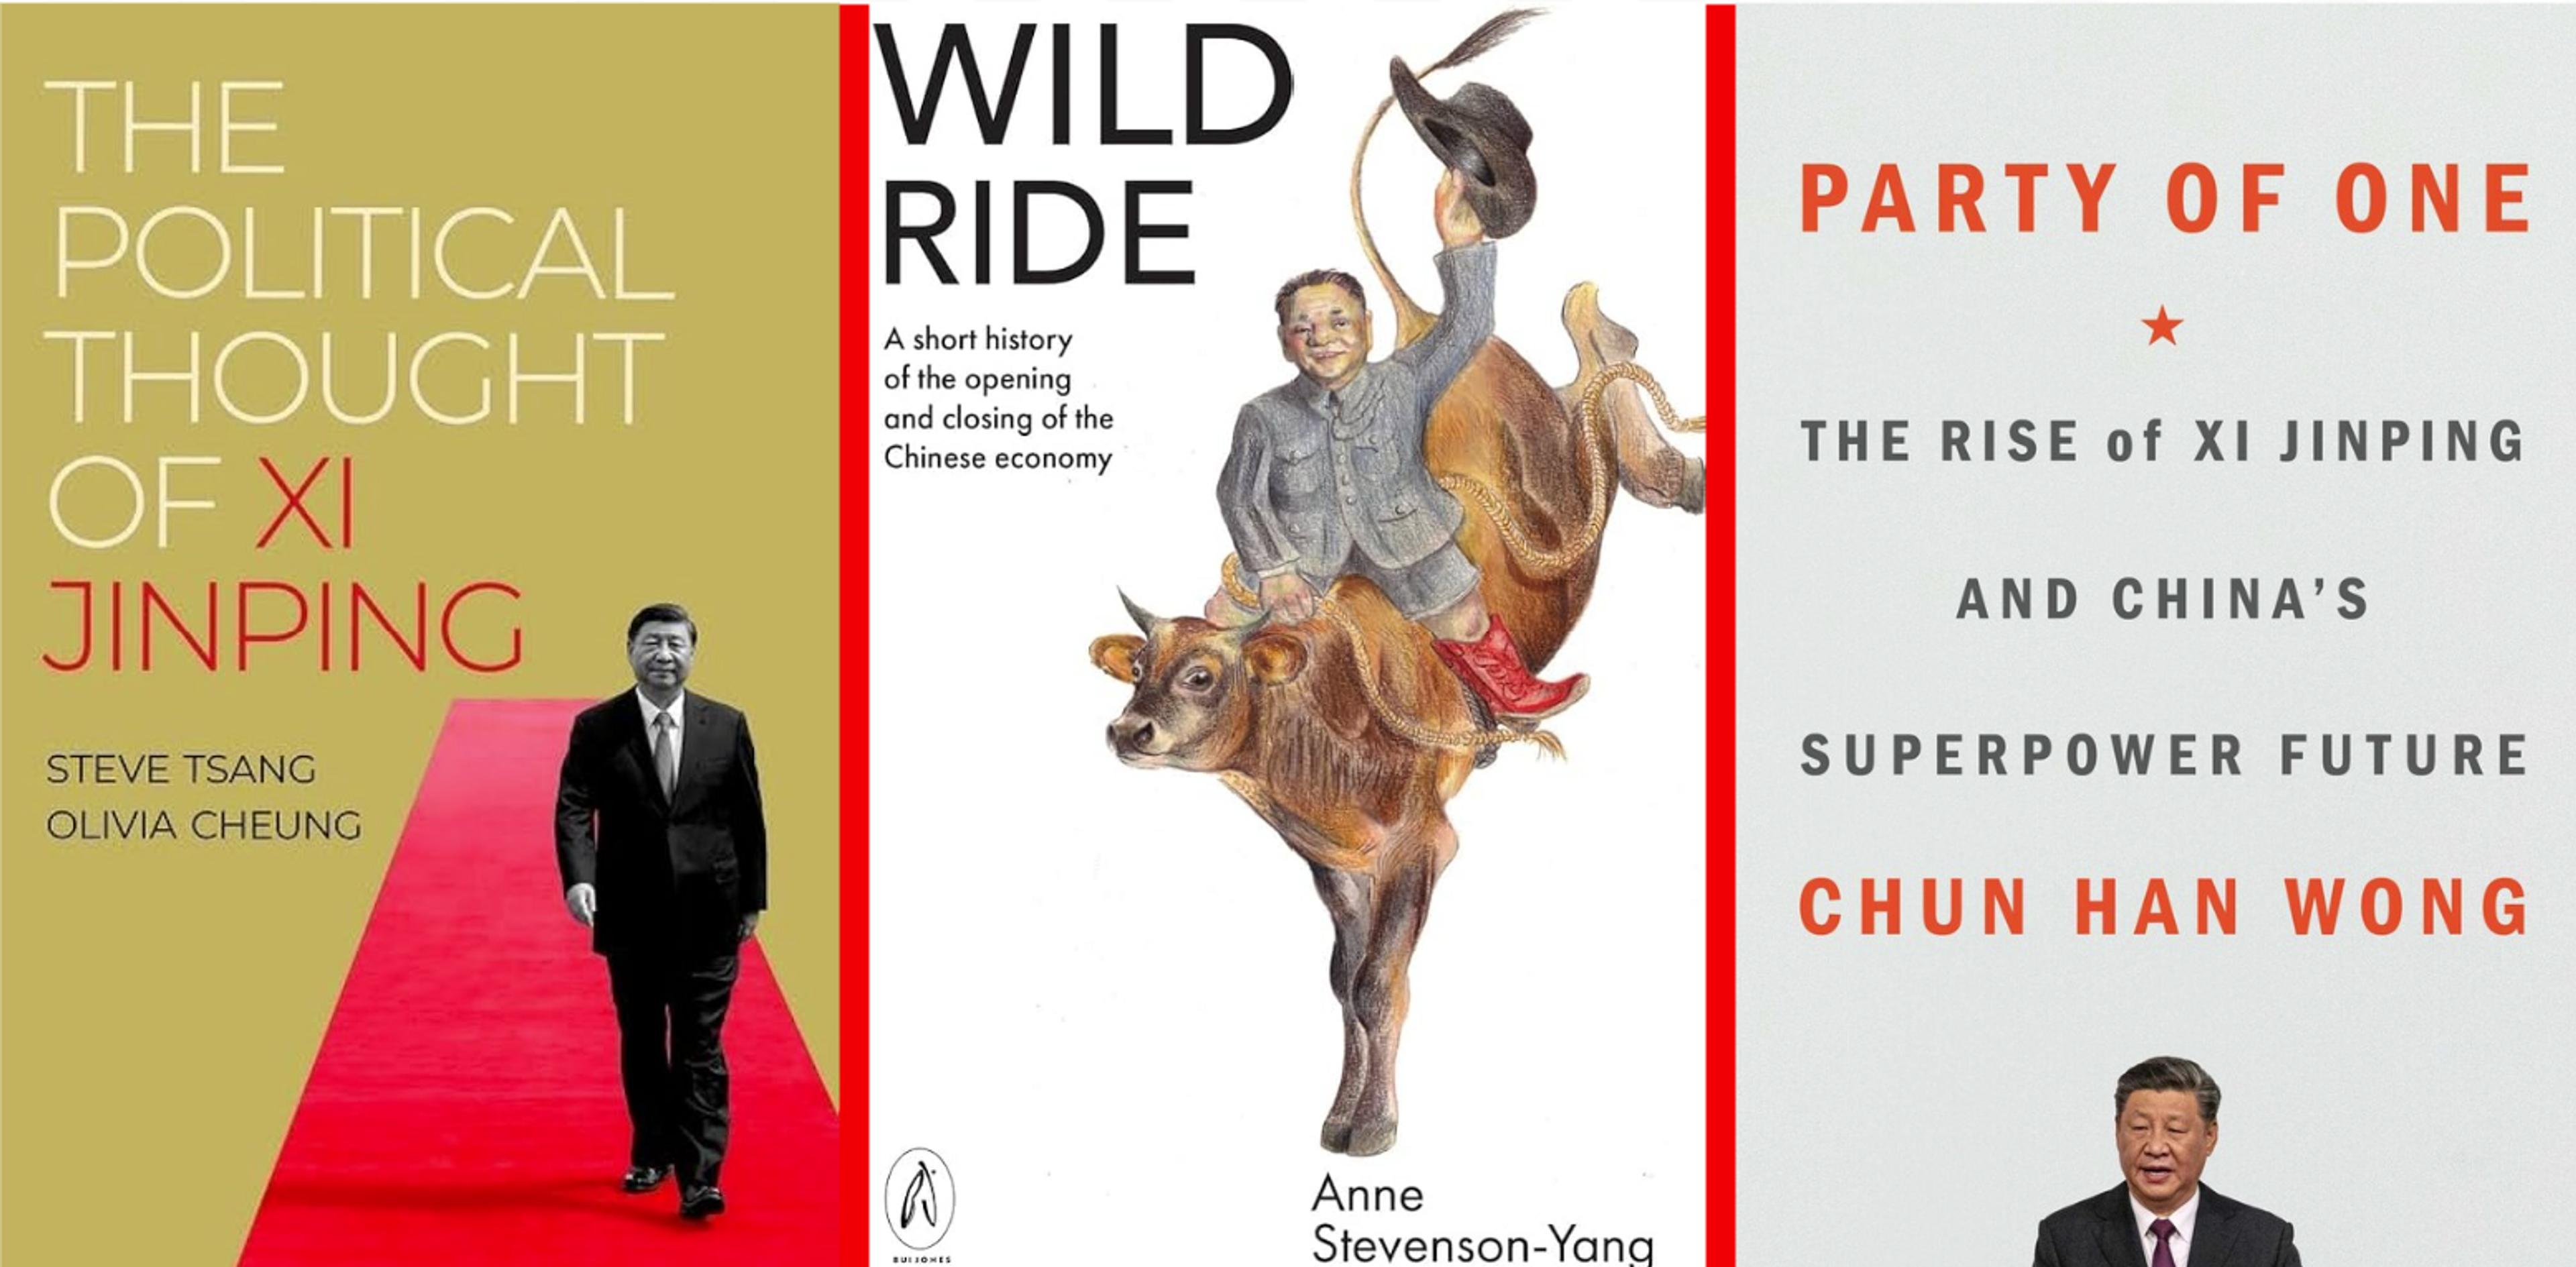 From Aspiration to Constriction: On Three New Books Examining Change in China